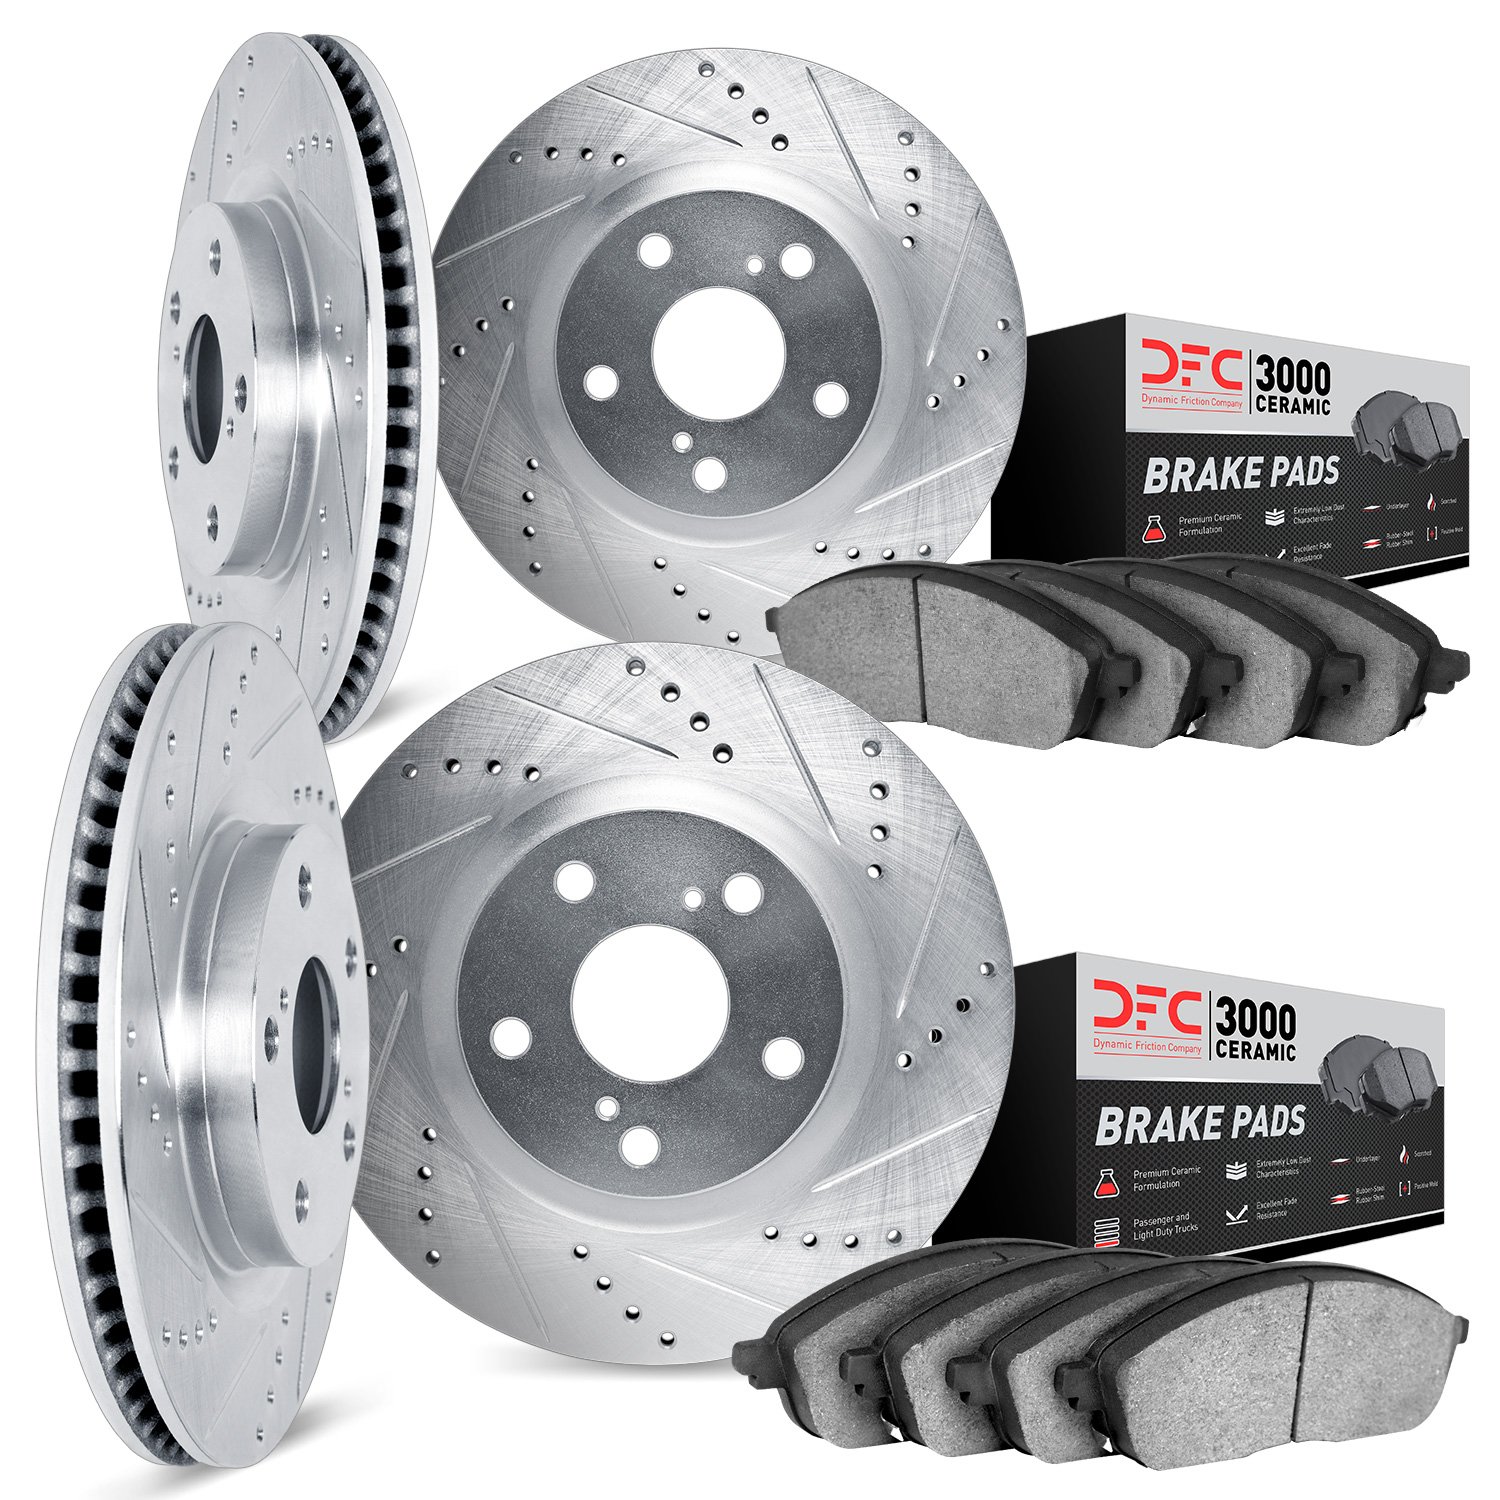 7304-42009 Drilled/Slotted Brake Rotor with 3000-Series Ceramic Brake Pads Kit [Silver], 2006-2010 Mopar, Position: Front and Re